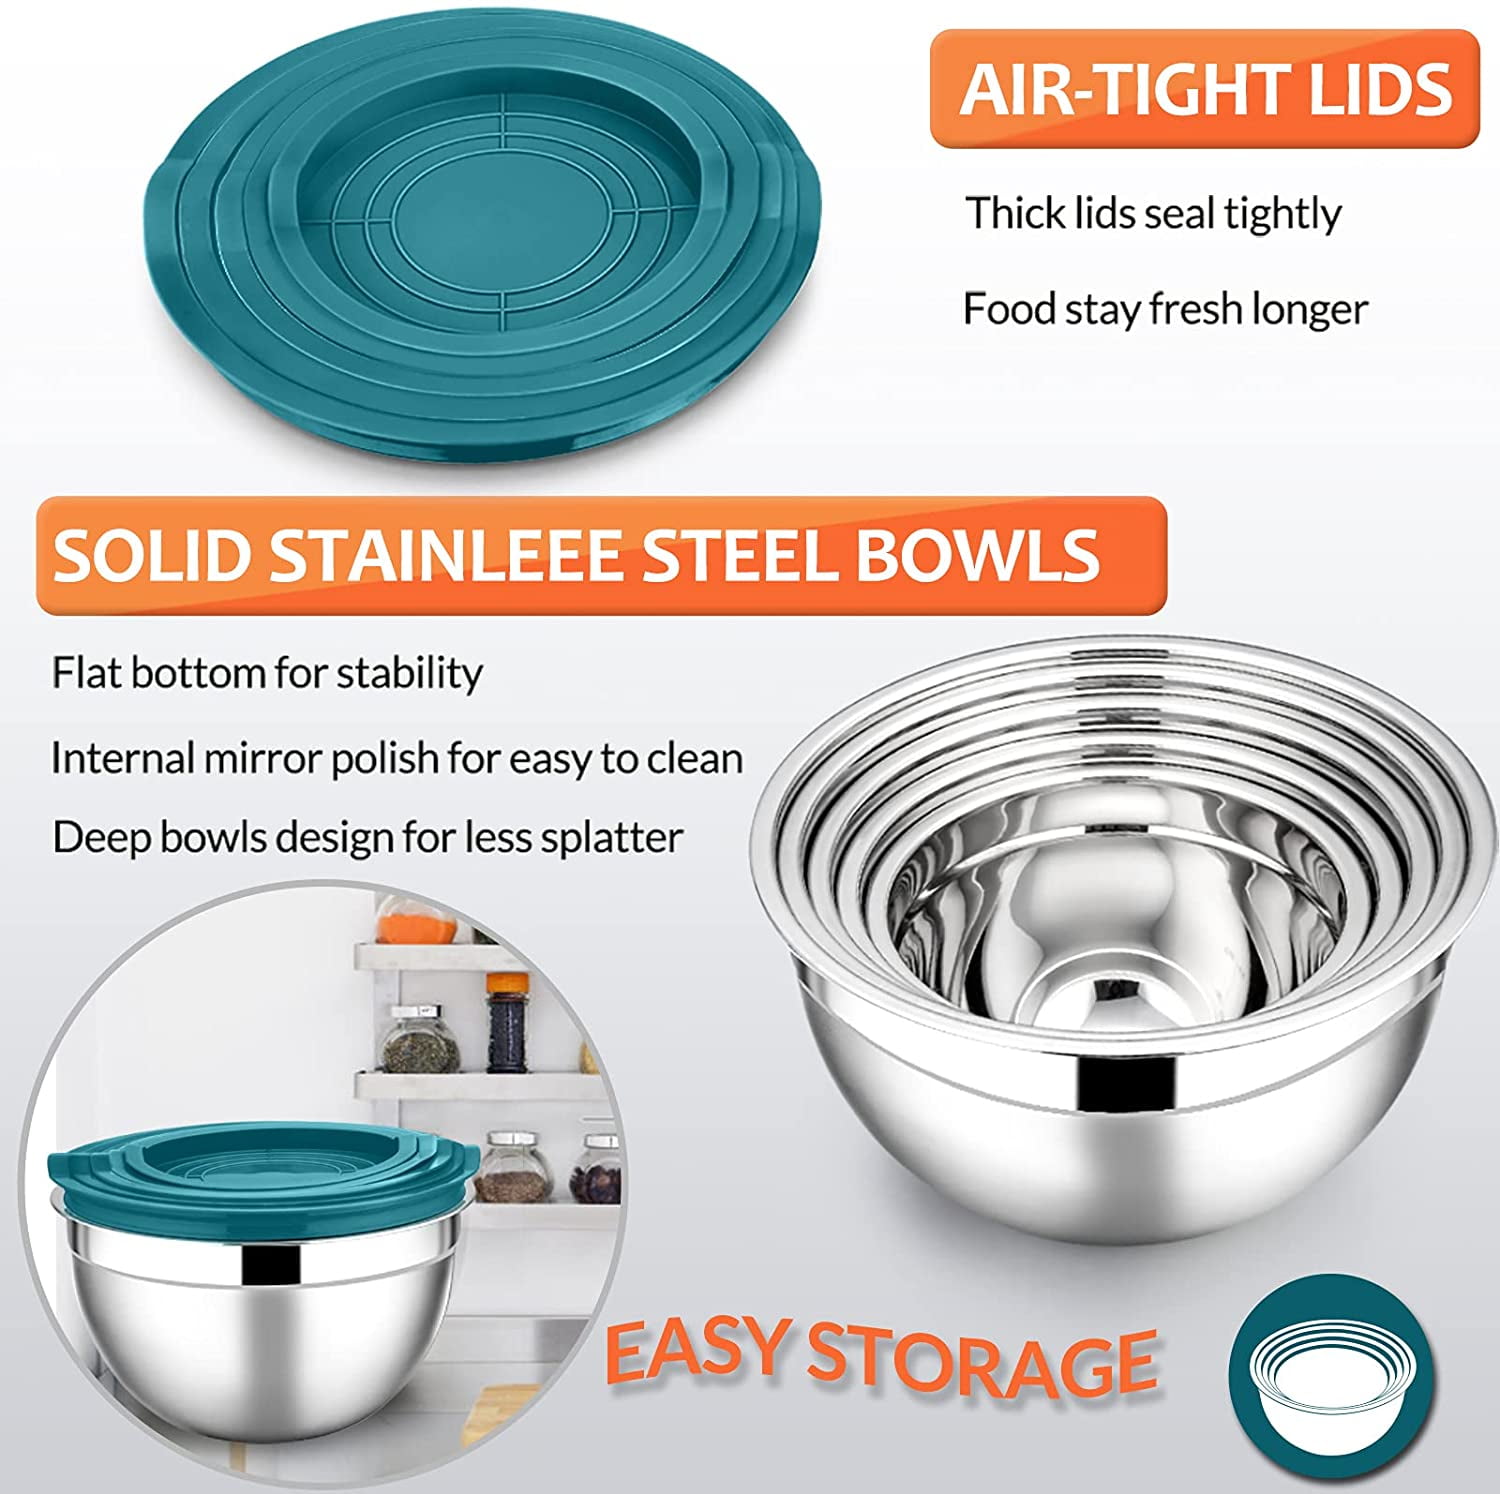  Pinnacle Plate Stainless Steel Mixing Bowls - 5 Pack Nesting  Baking Supplies for Cooking, Serving, Food Prep - Dishwasher Kitchen Set,  Stackable Salad Bowl for Easy Storage: Home & Kitchen